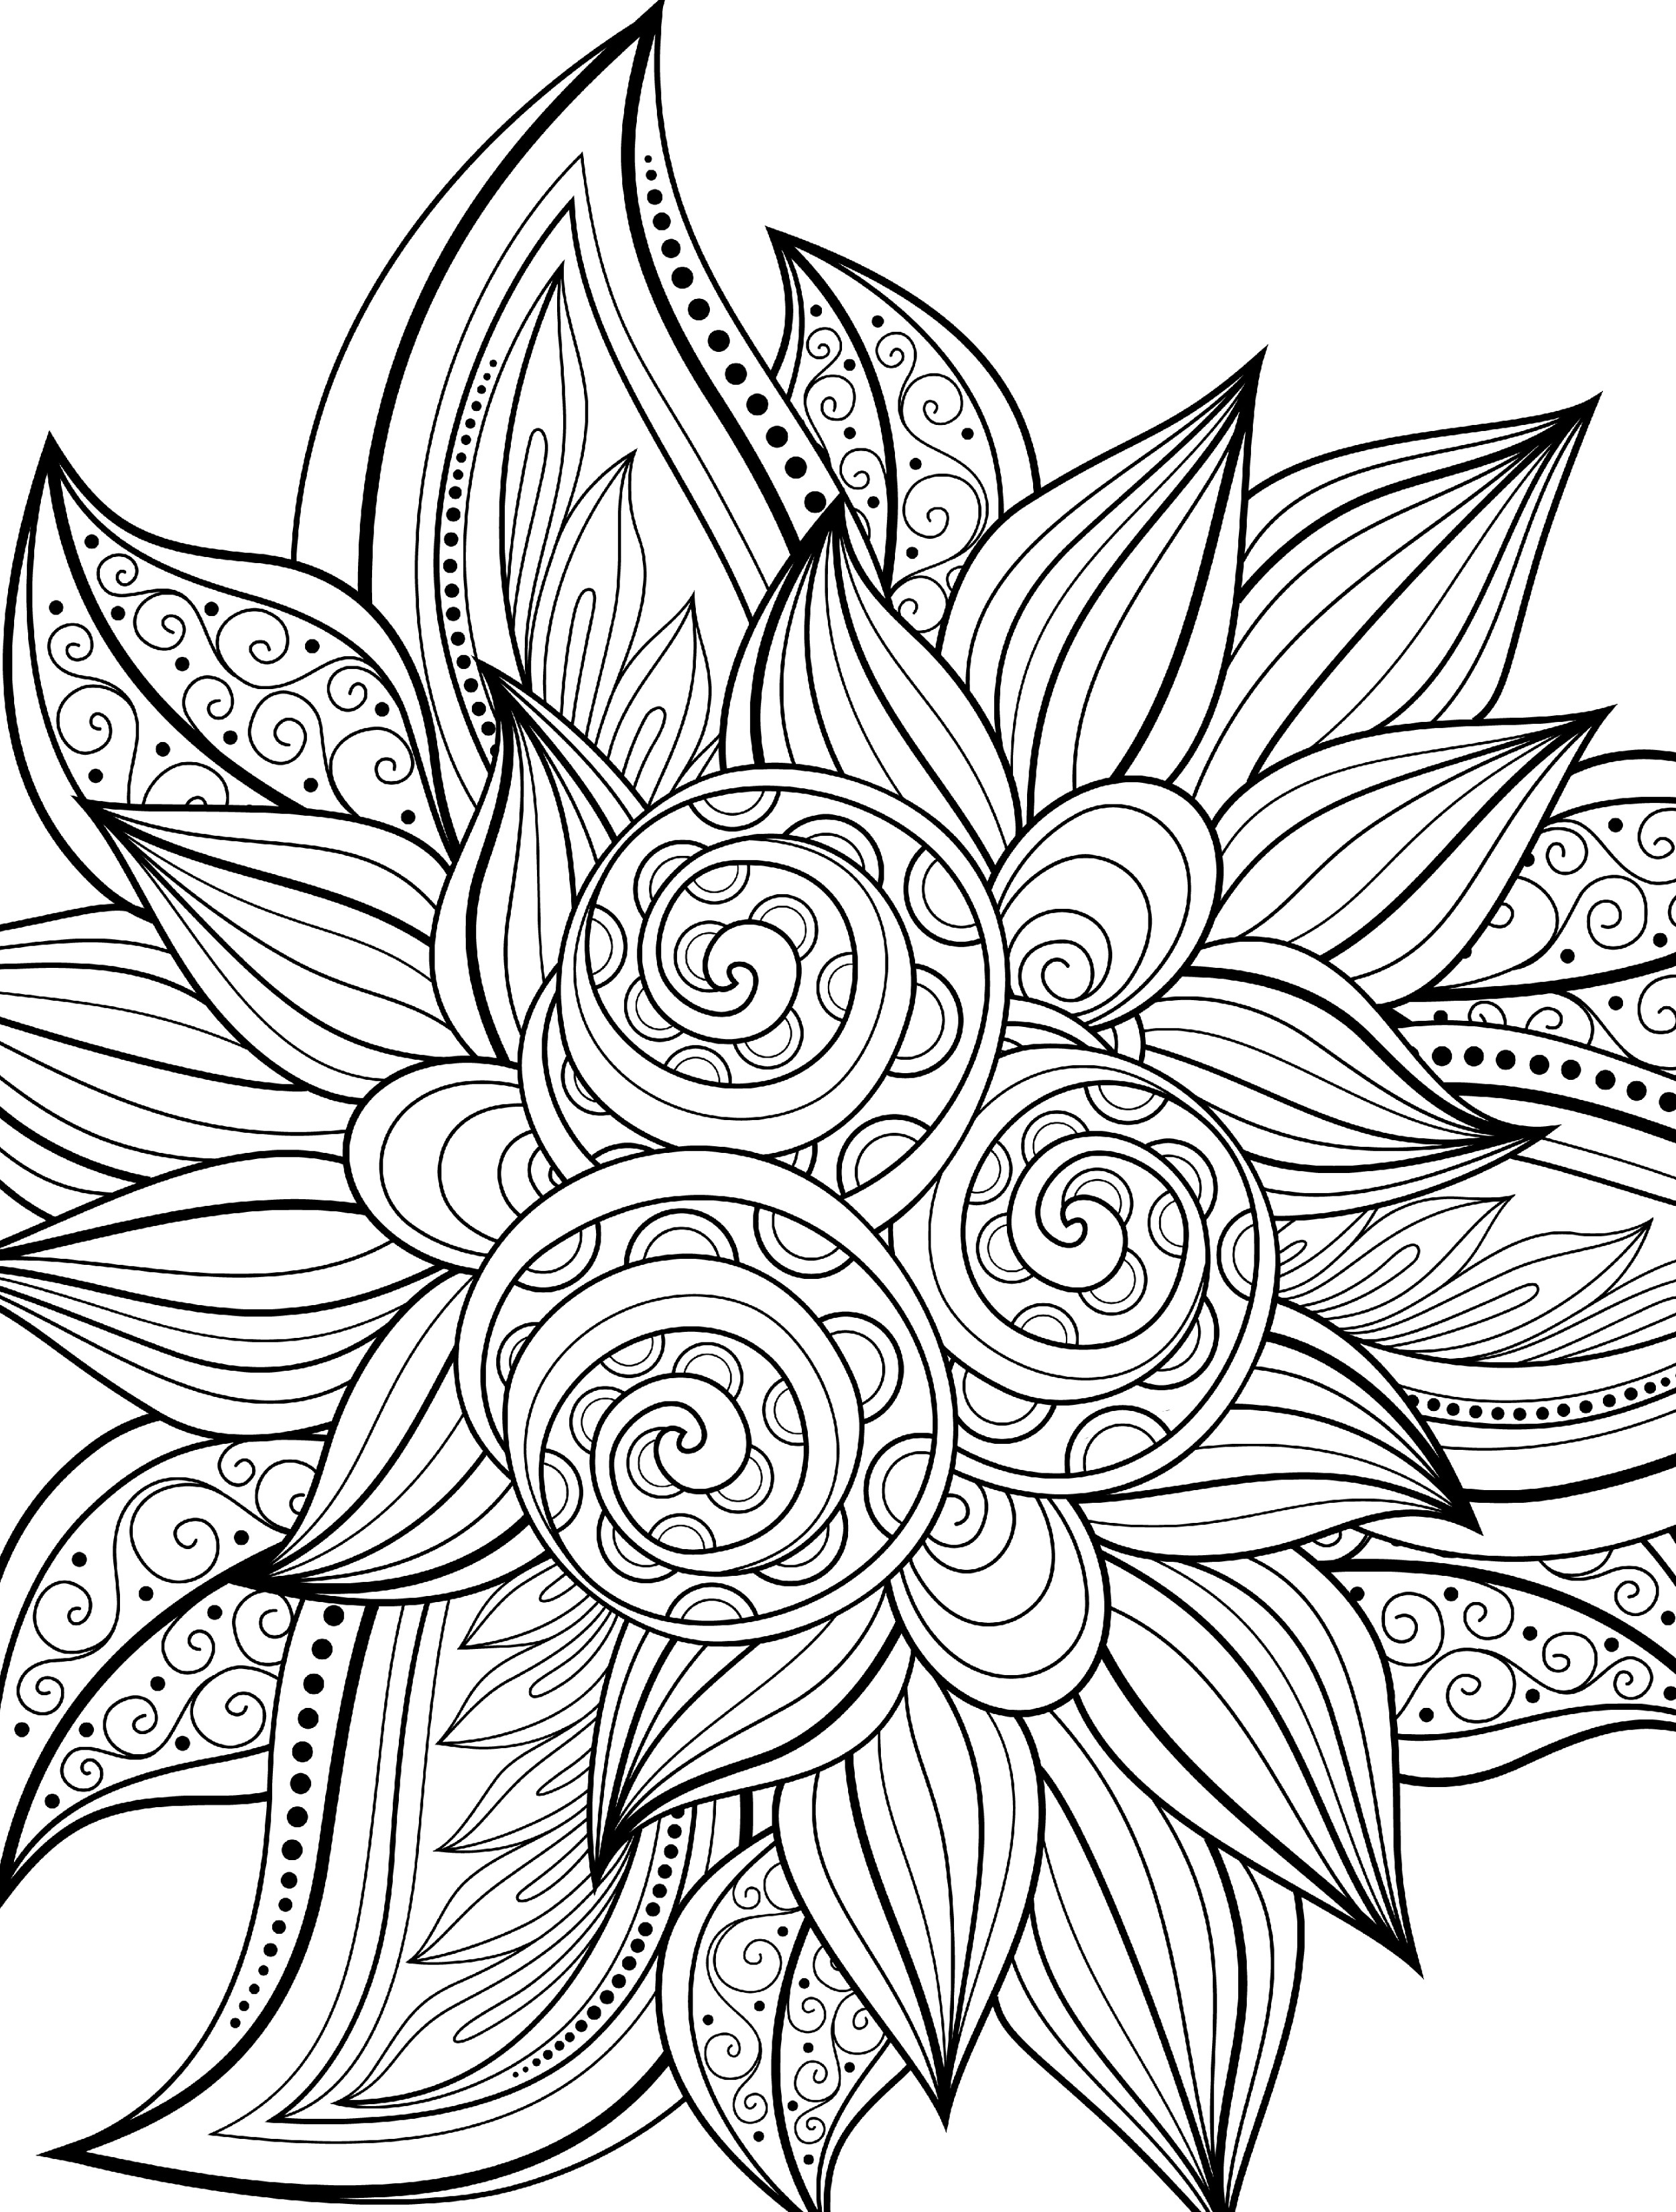 10 Free Printable Holiday Adult Coloring Pages - Www Free Printable Coloring Pages